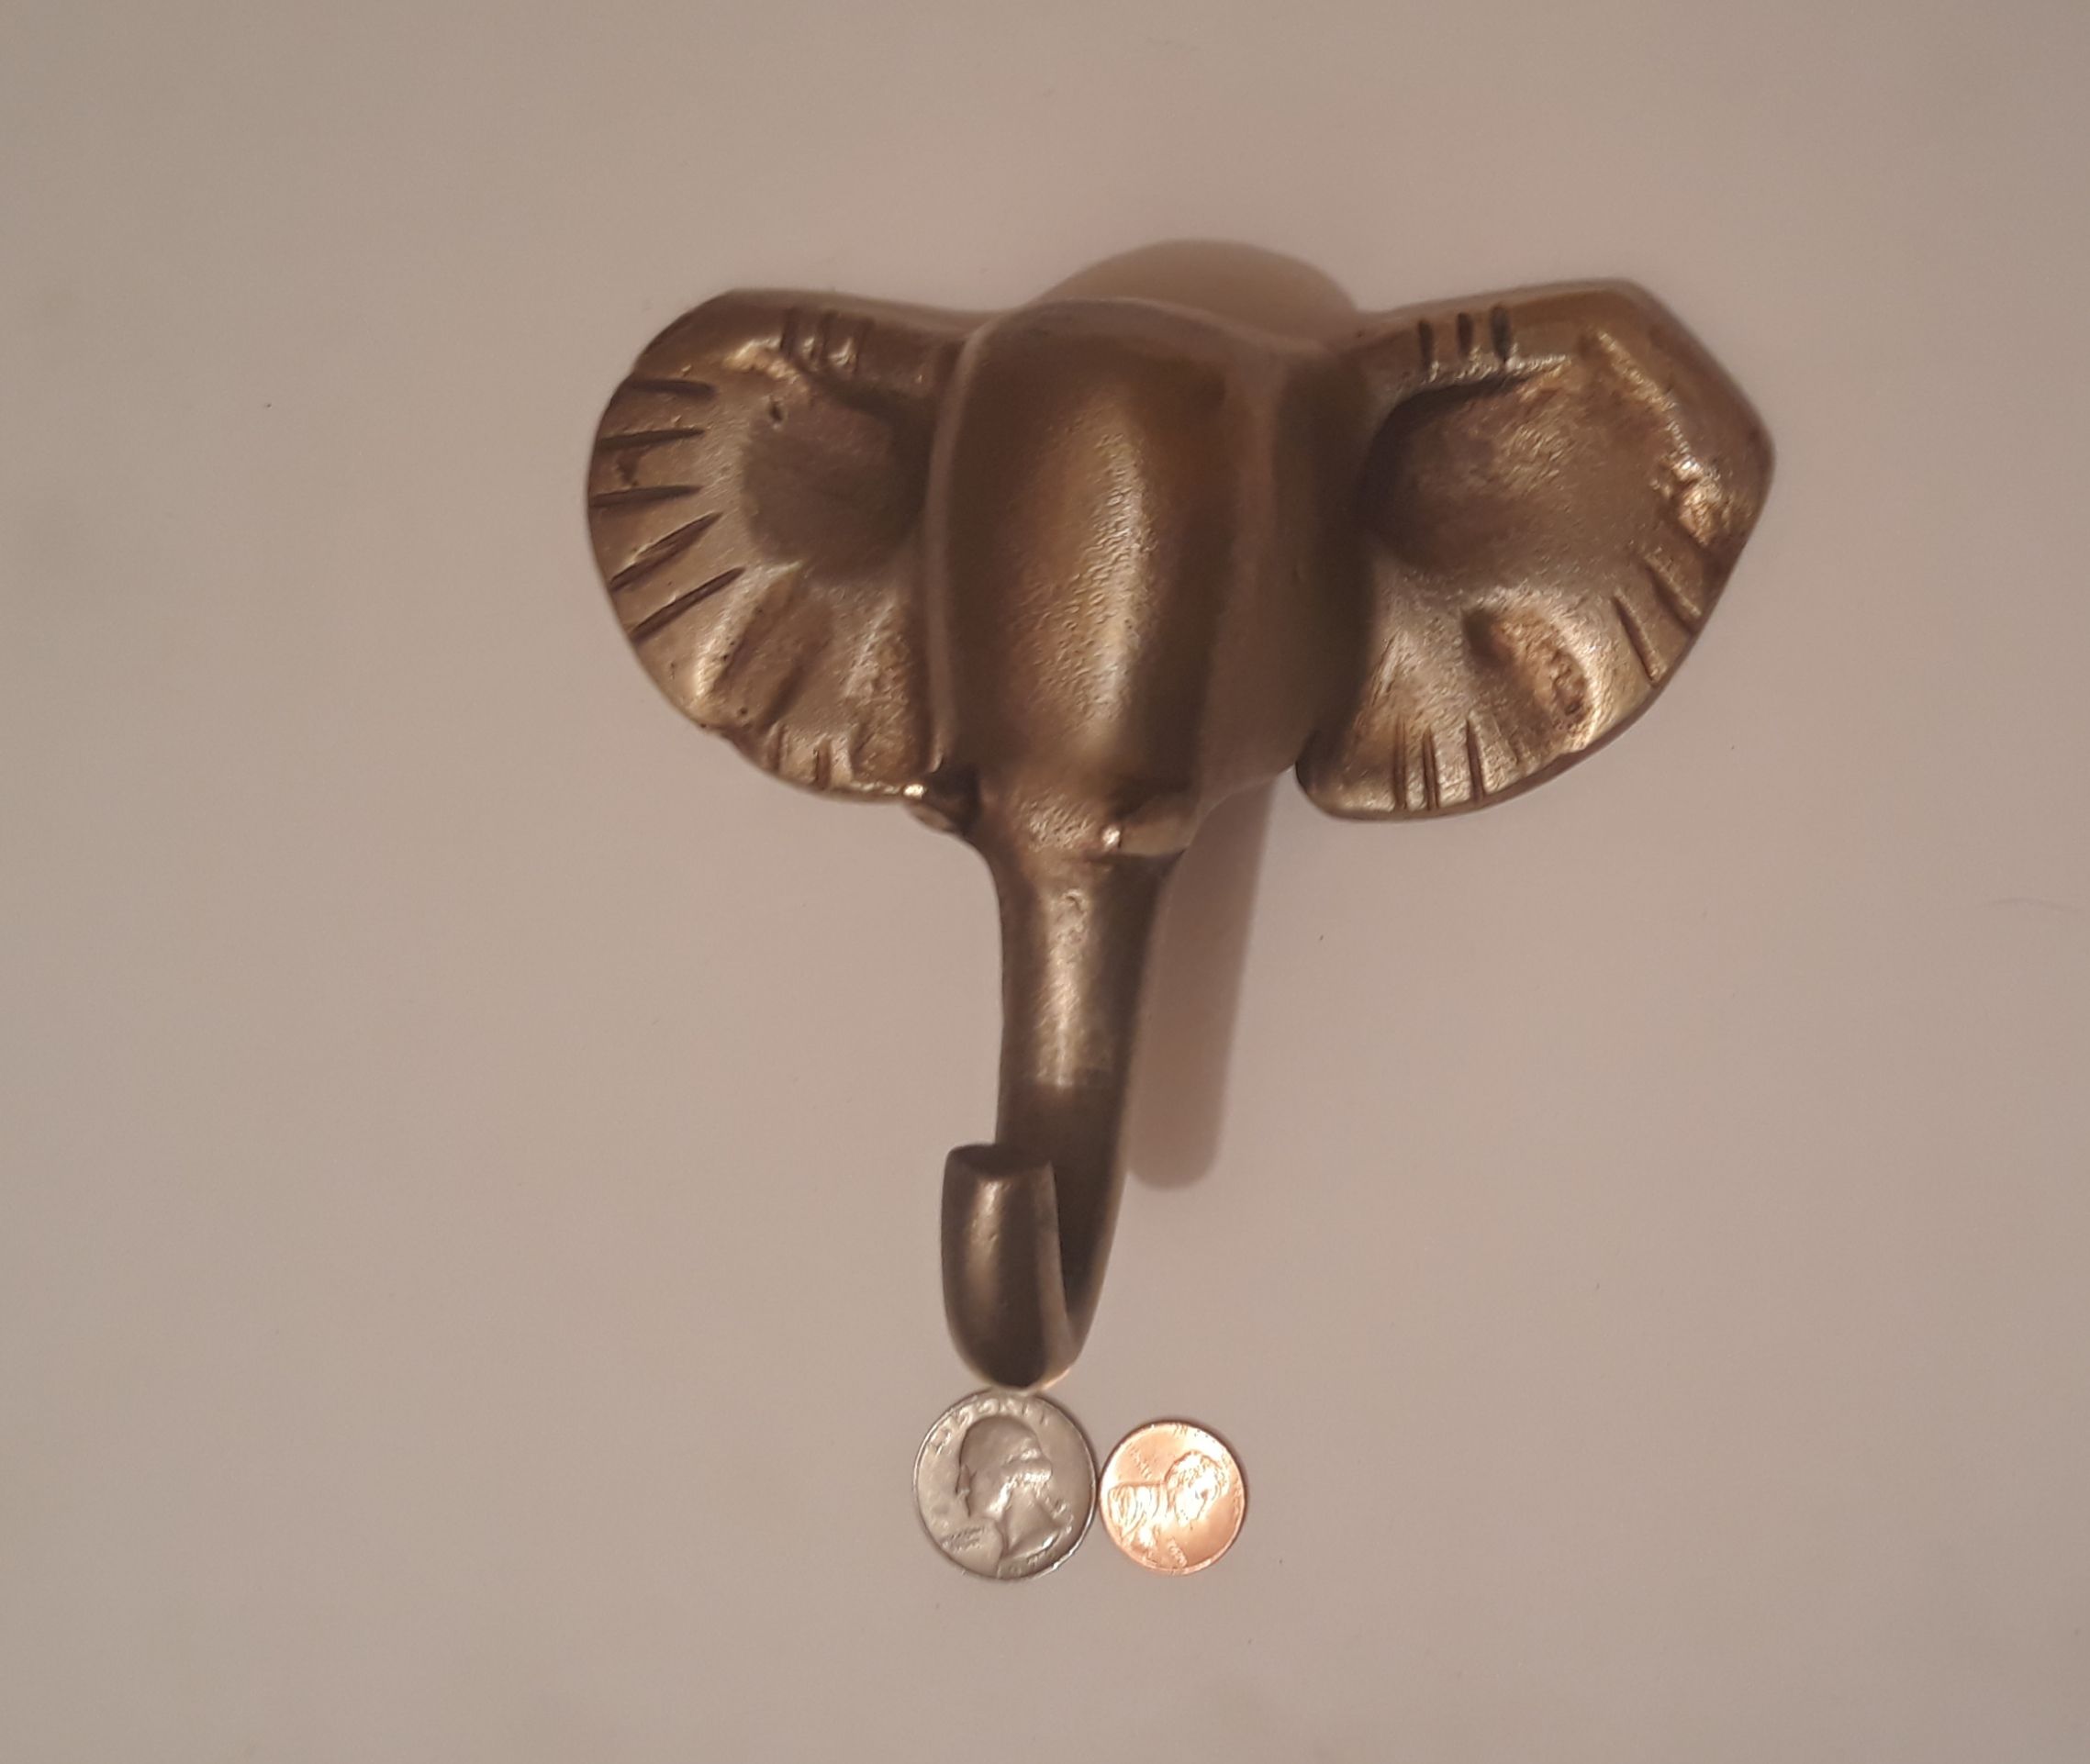 Vintage Brass Metal Elephant Coat Hook, Home Decor, Wall Decor, 6" Wide, This Can Be Shined up More